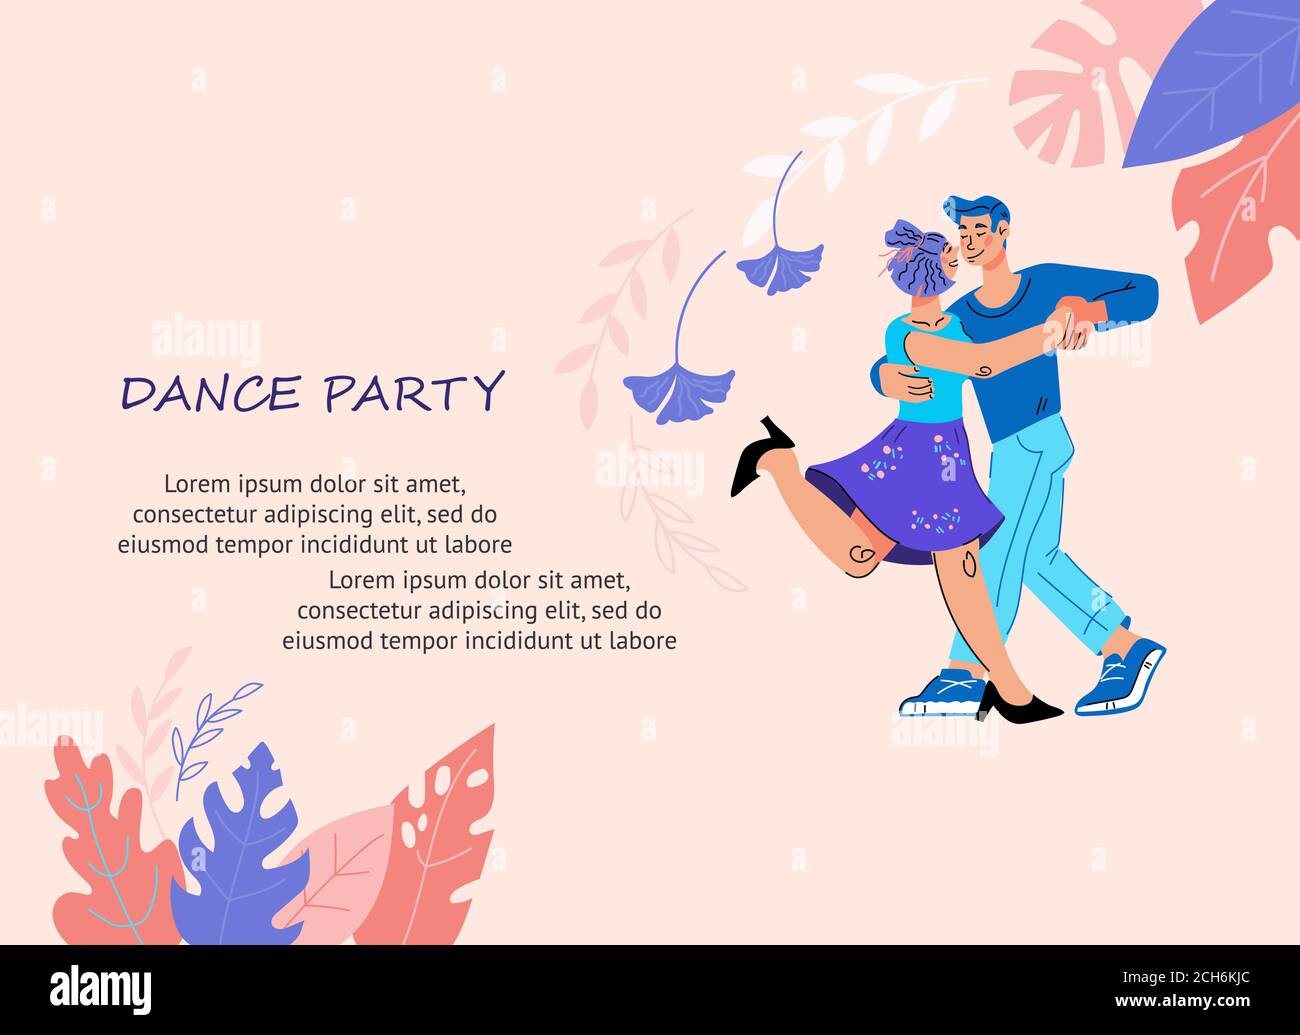 Dance party card or banner with couple dancing. Stock Vector